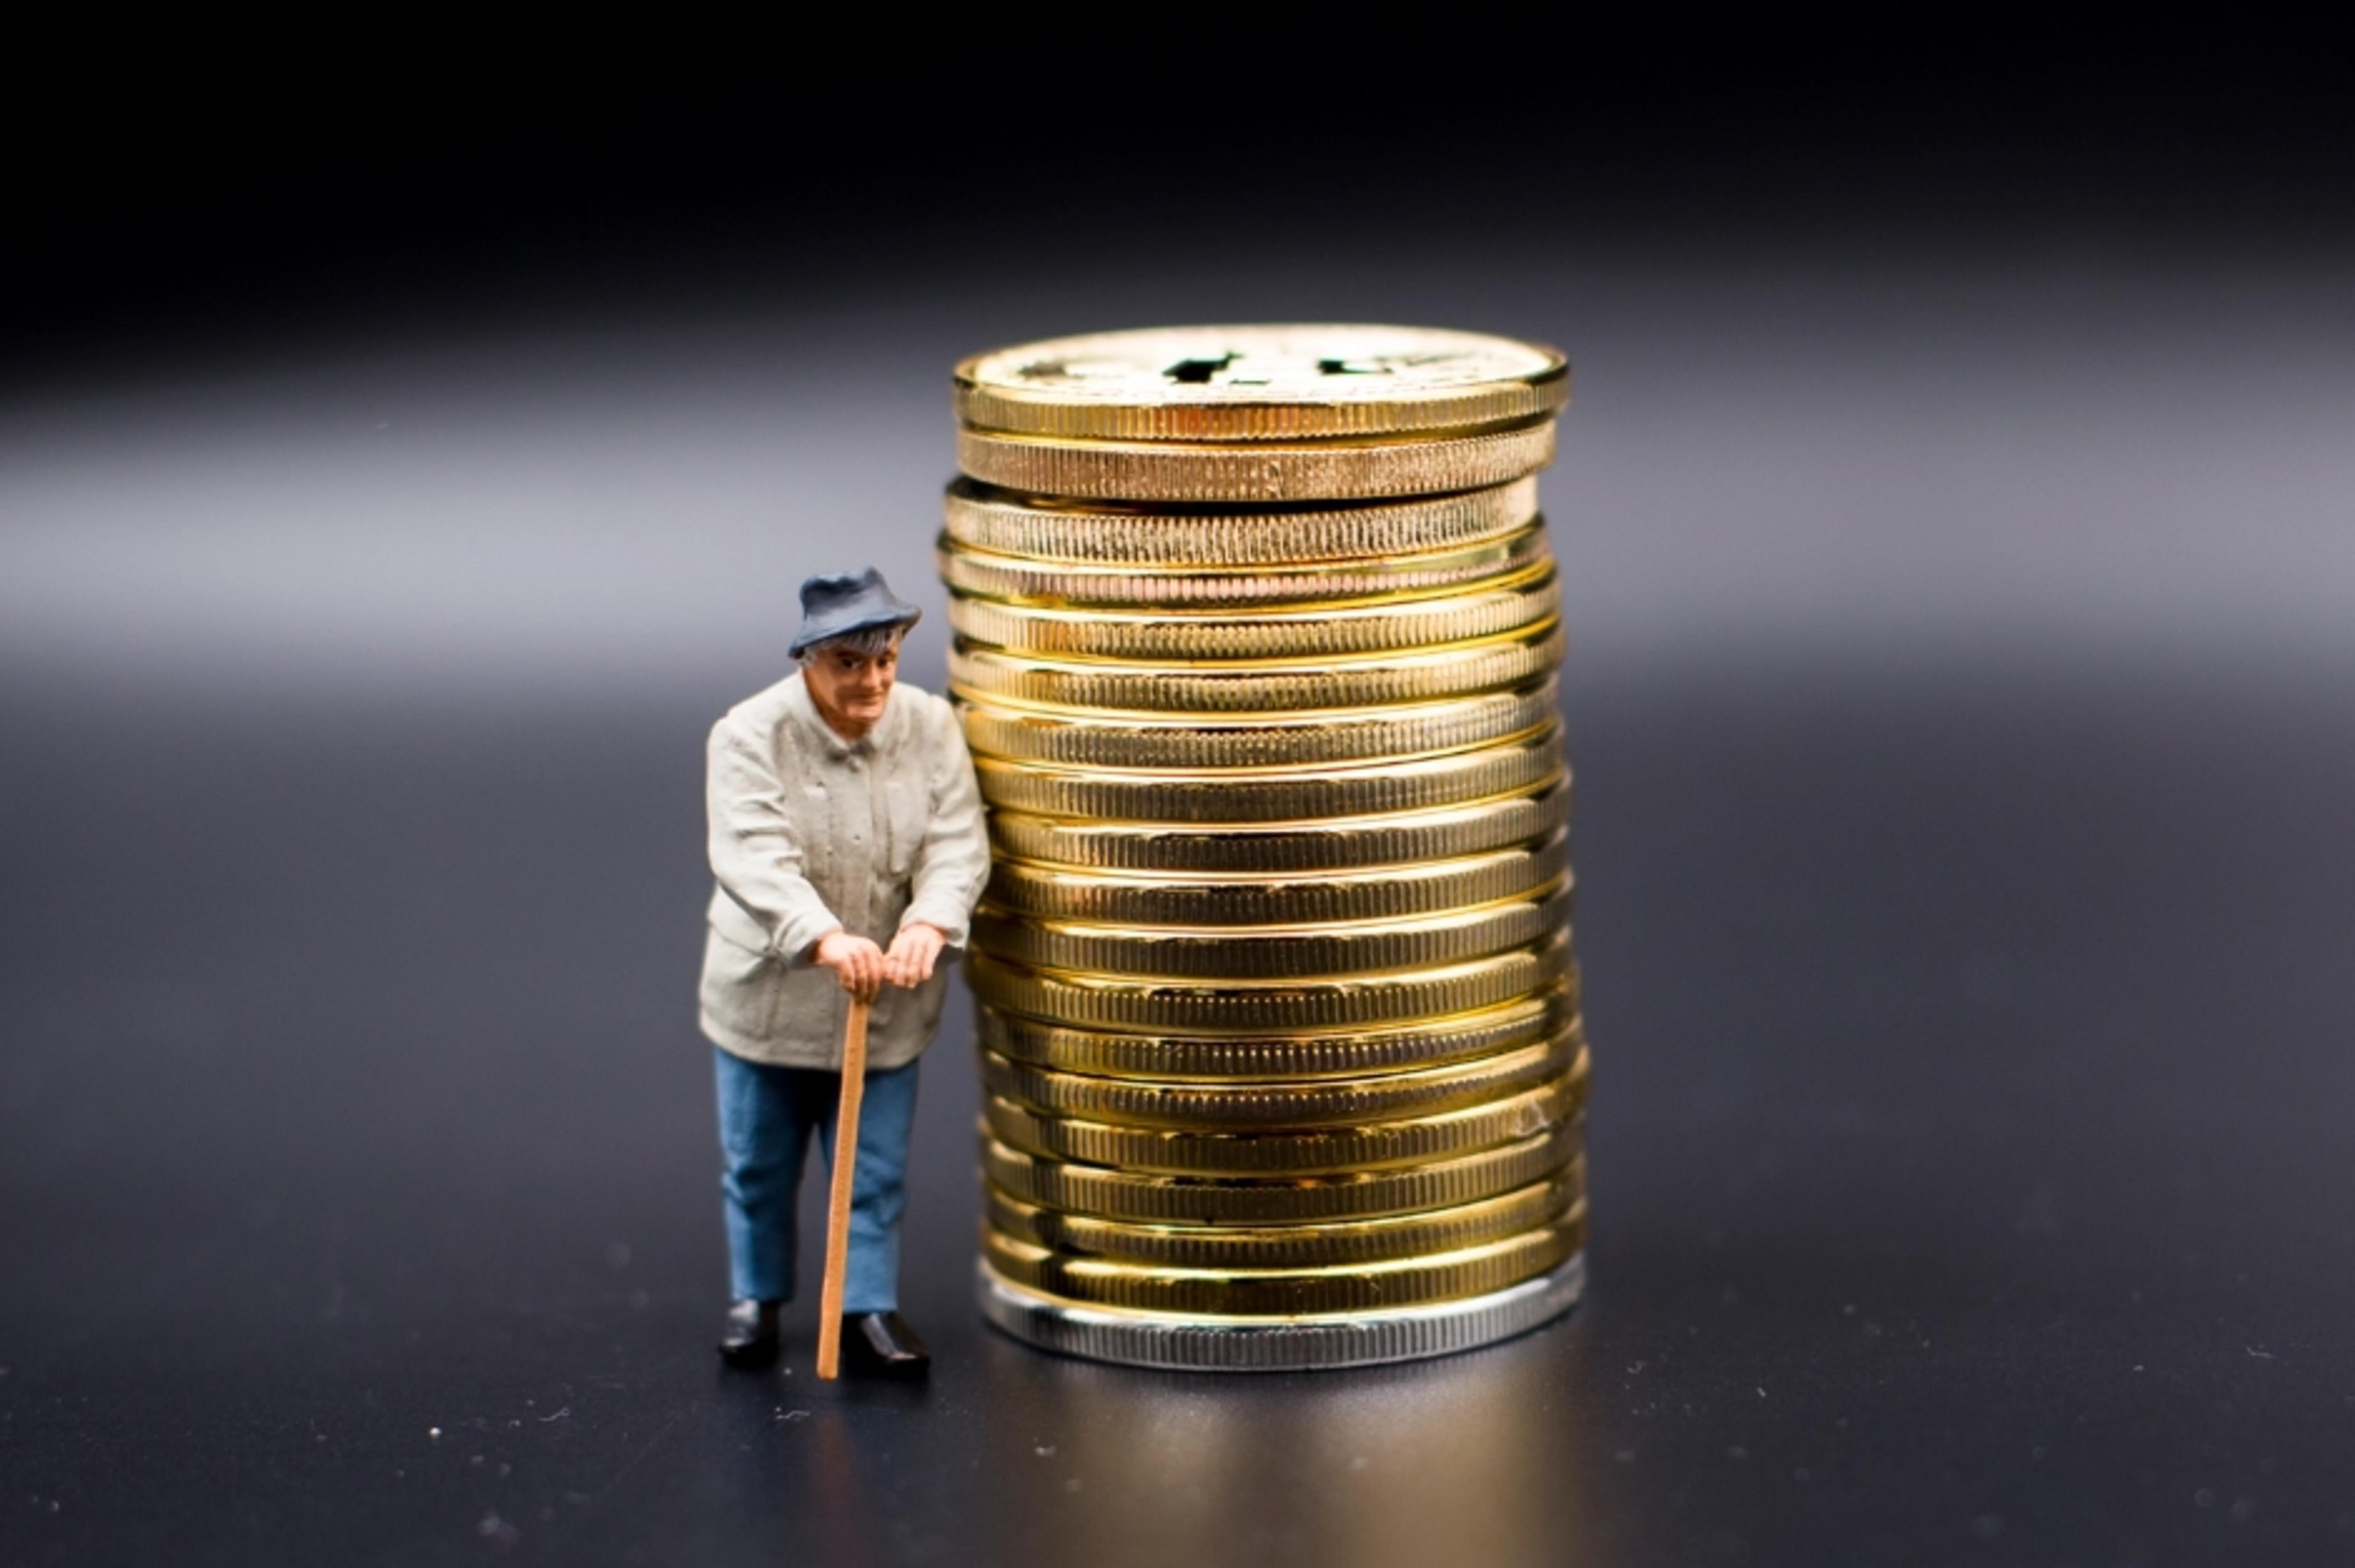 A photo of a miniature man standing next to a pile of coins